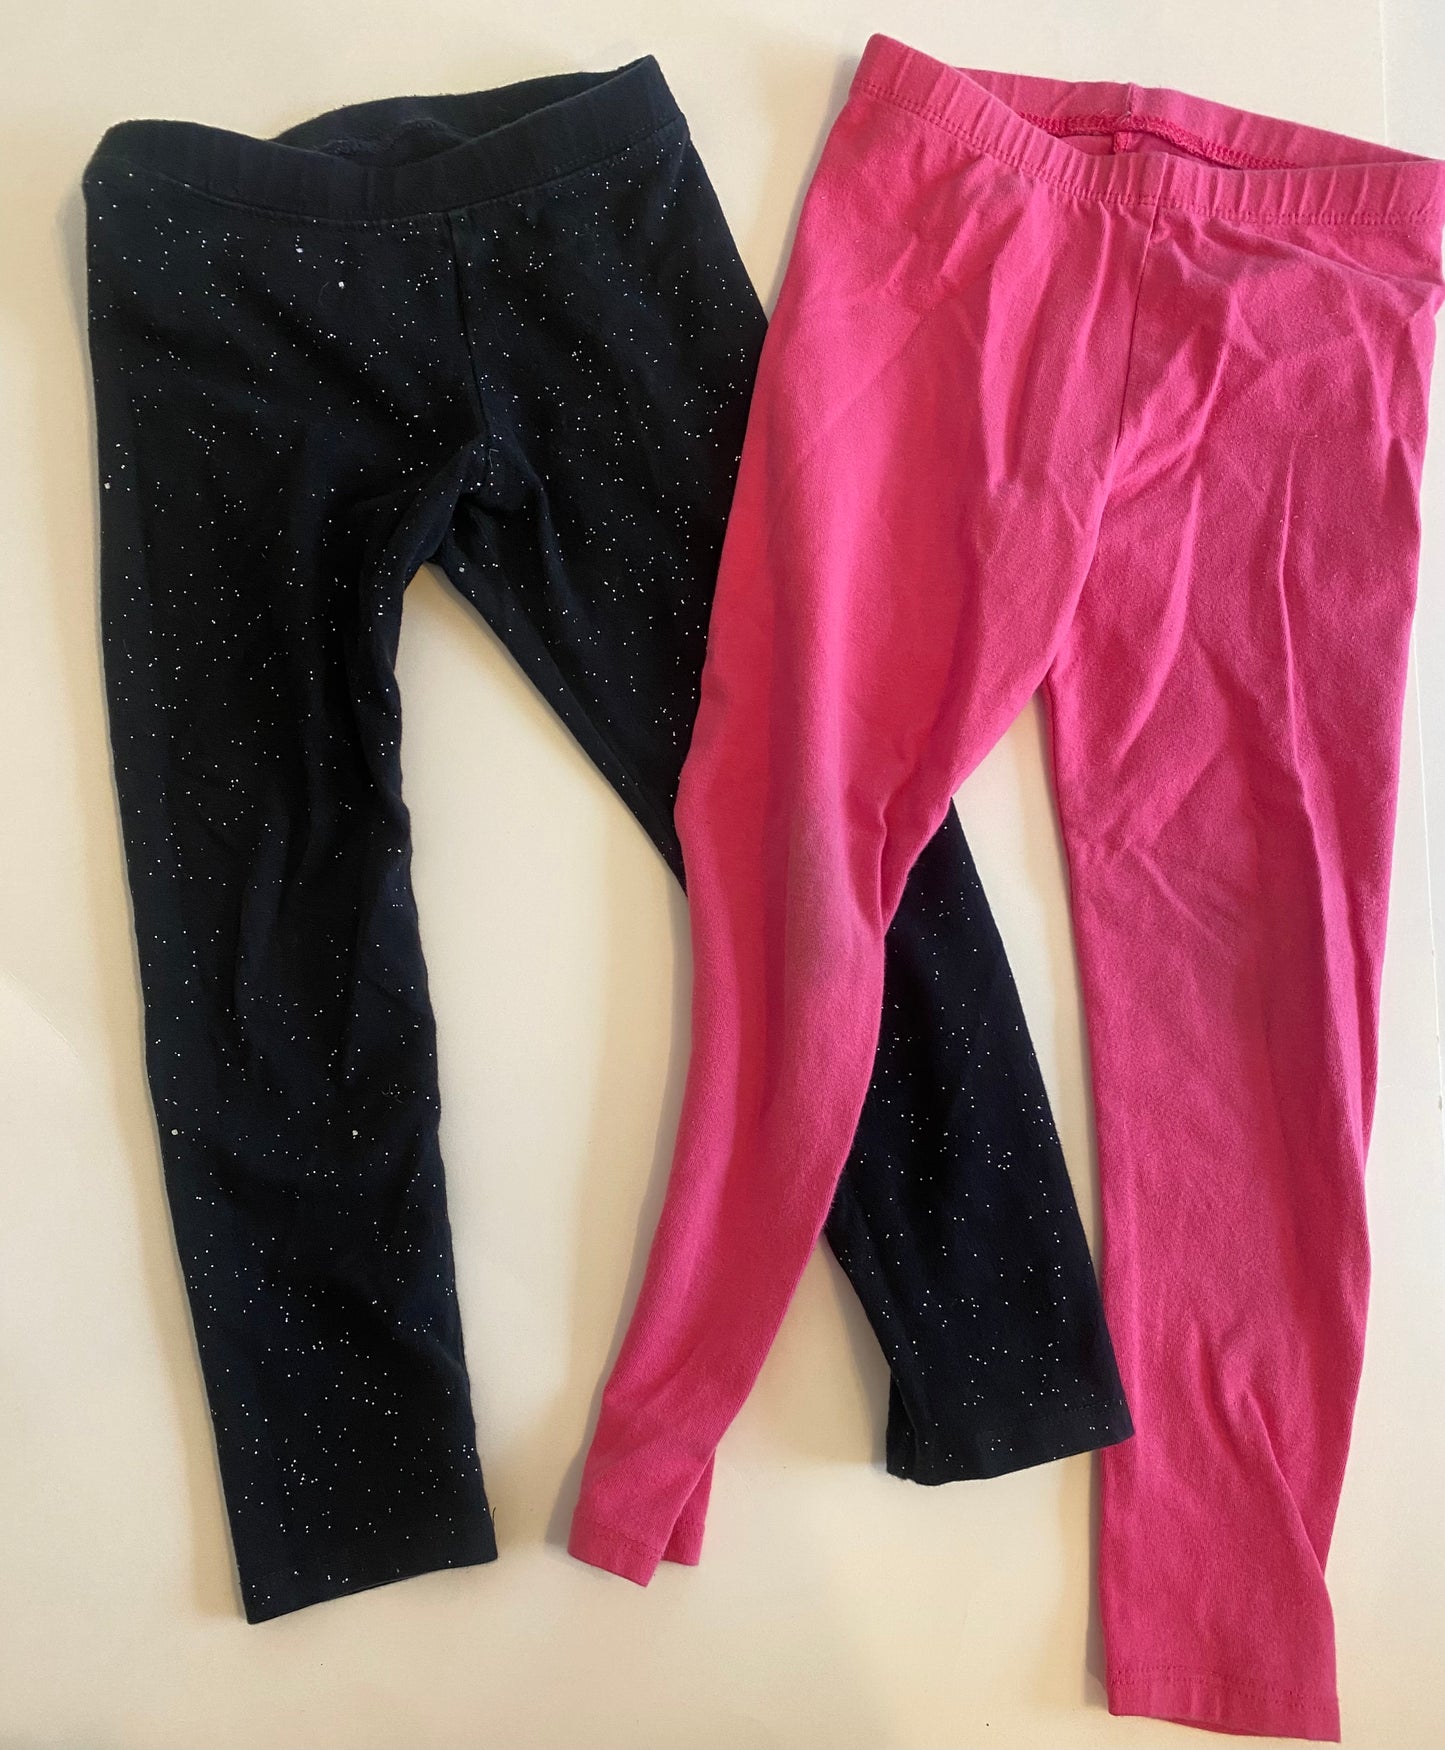 Girls 4T leggings. Black sparkle and pink